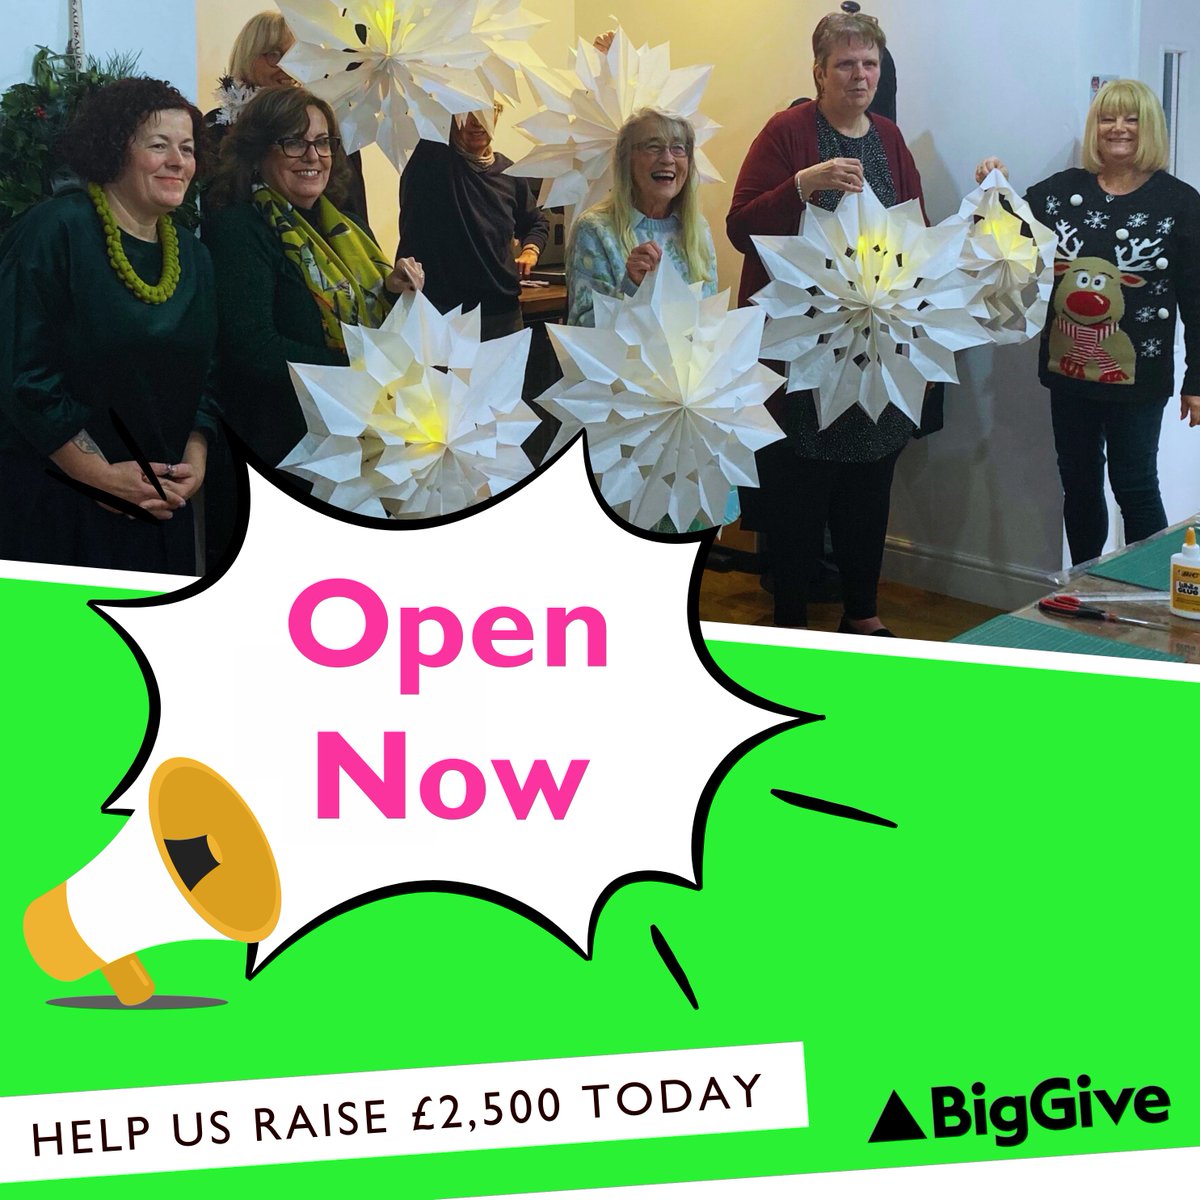 Our Big Give campaign is now live! Help us raise £2,500 in seven days for our over 55s creative sessions. If we reach our target, Big Give will match fund it! To donate, no mater how big or small, please visit donate.biggive.org/campaign/a0569… #BigGive #fundraising #donate #donation